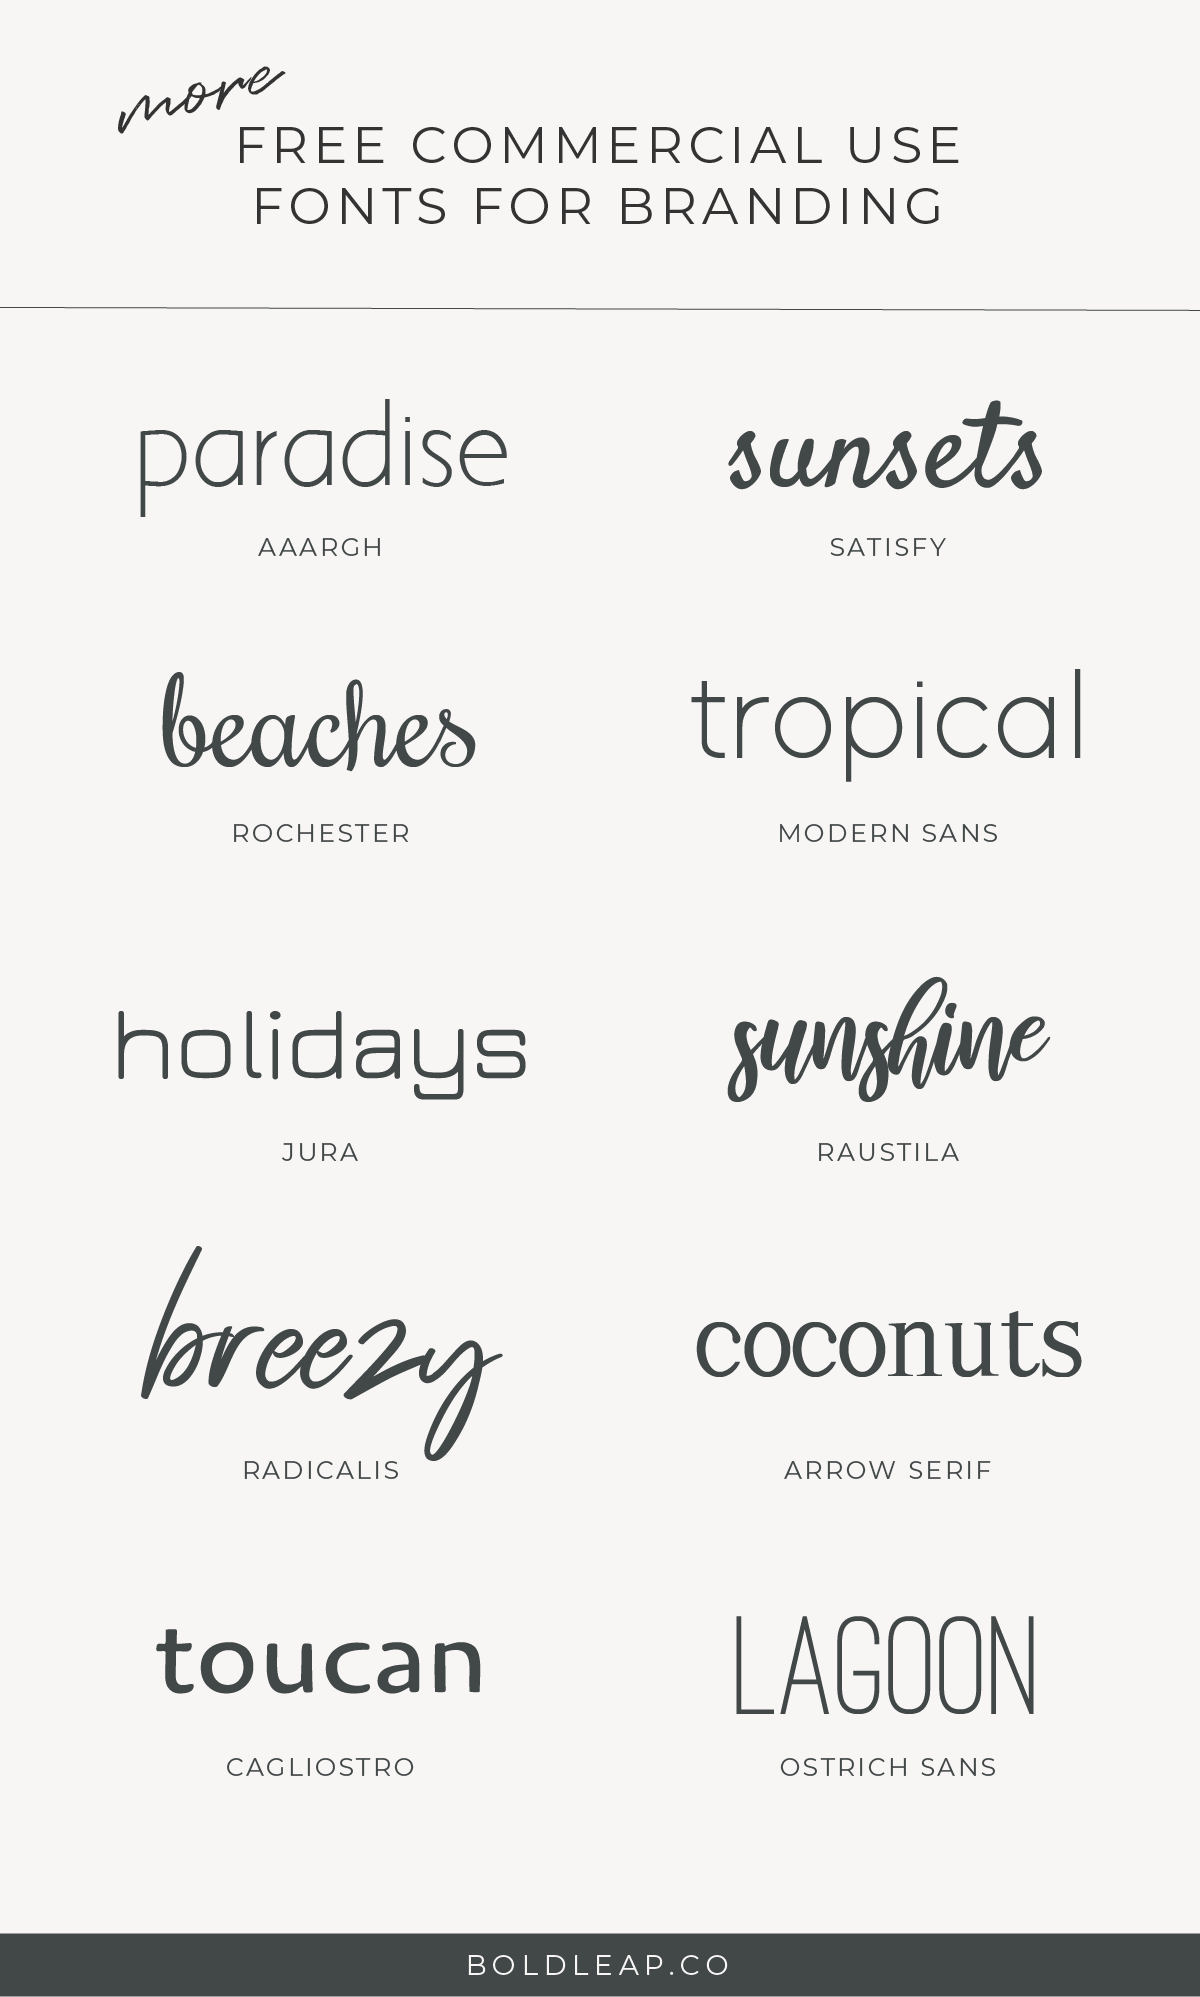 10 More Free Commercial Use Fonts for Branding - commercialuseboldleap 01